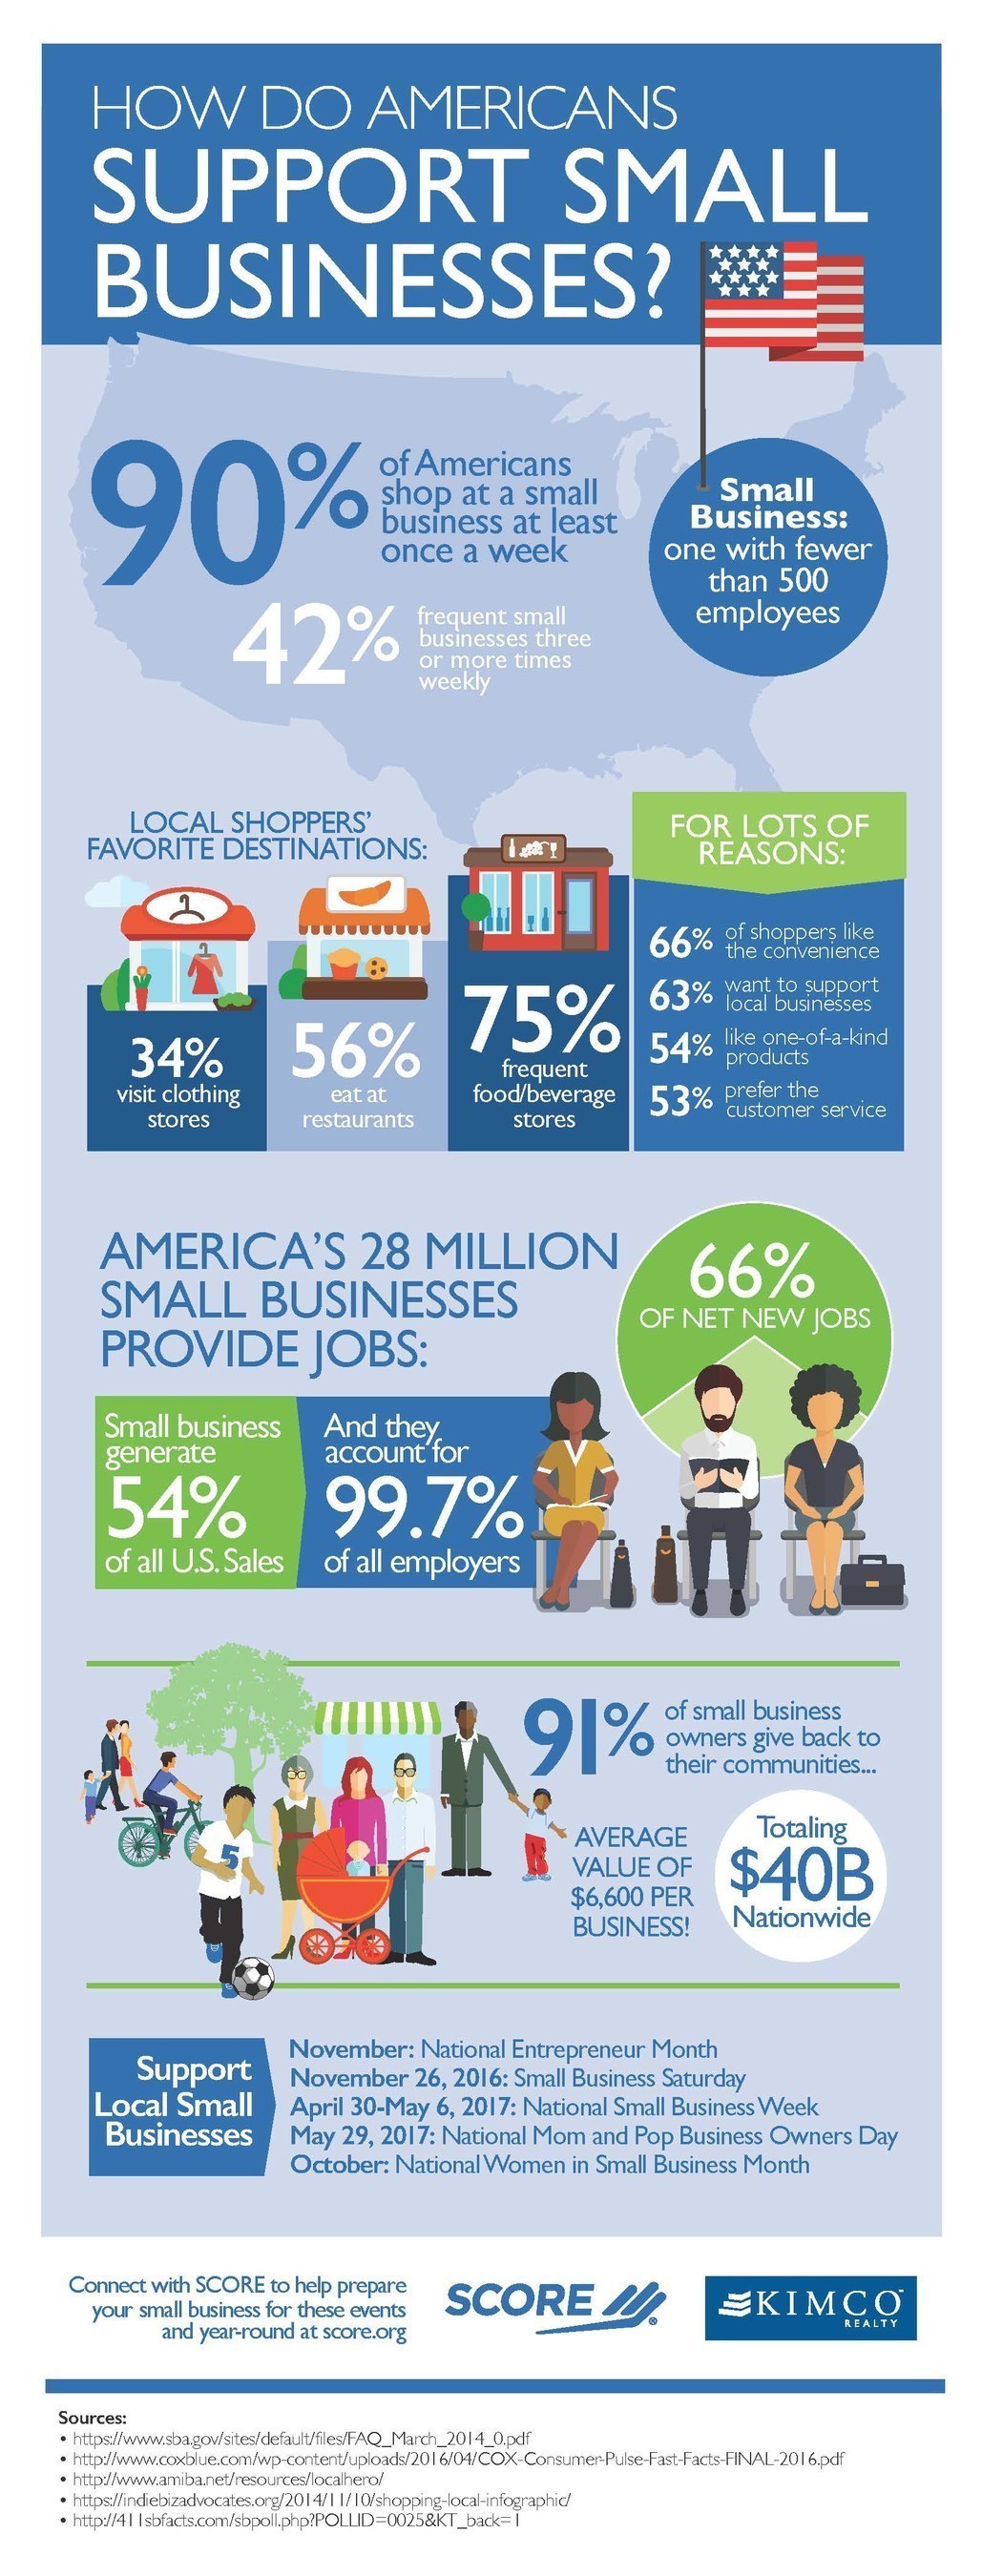 SCORE, the nation's largest network of volunteer, expert business mentors, has gathered statistics that show strong consumer support for America's 28 million small businesses going into the busy 2016 holiday shopping season.